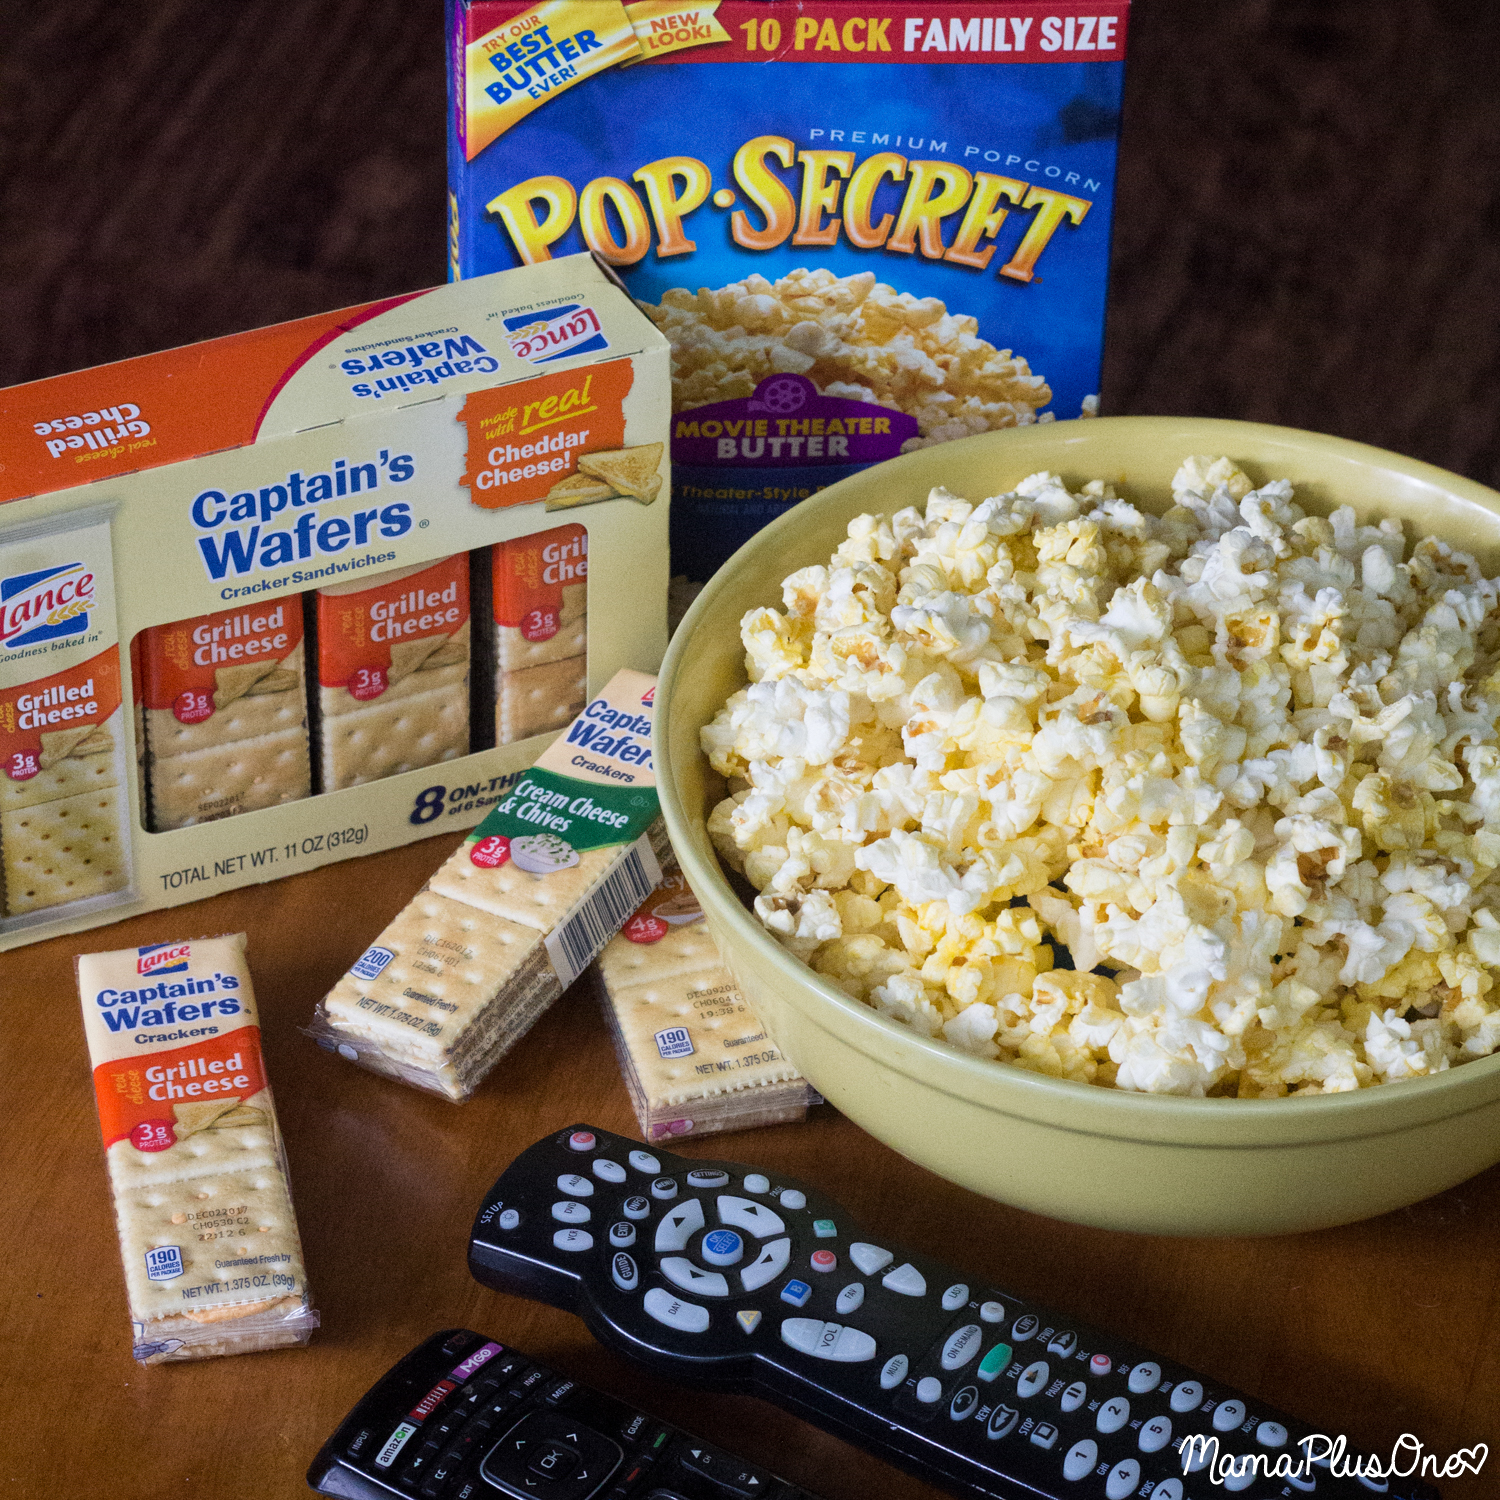 The school year can be a super trying time, between homework, extracurricular activities, sports, and more. That doesn't mean you have to compromise family time, though! Here are my tips for squeezing the most out of family movie nights during the busy school season with @popsecret @lancesnacks and @walmart. #Pop4Captain #Pmedia #ad